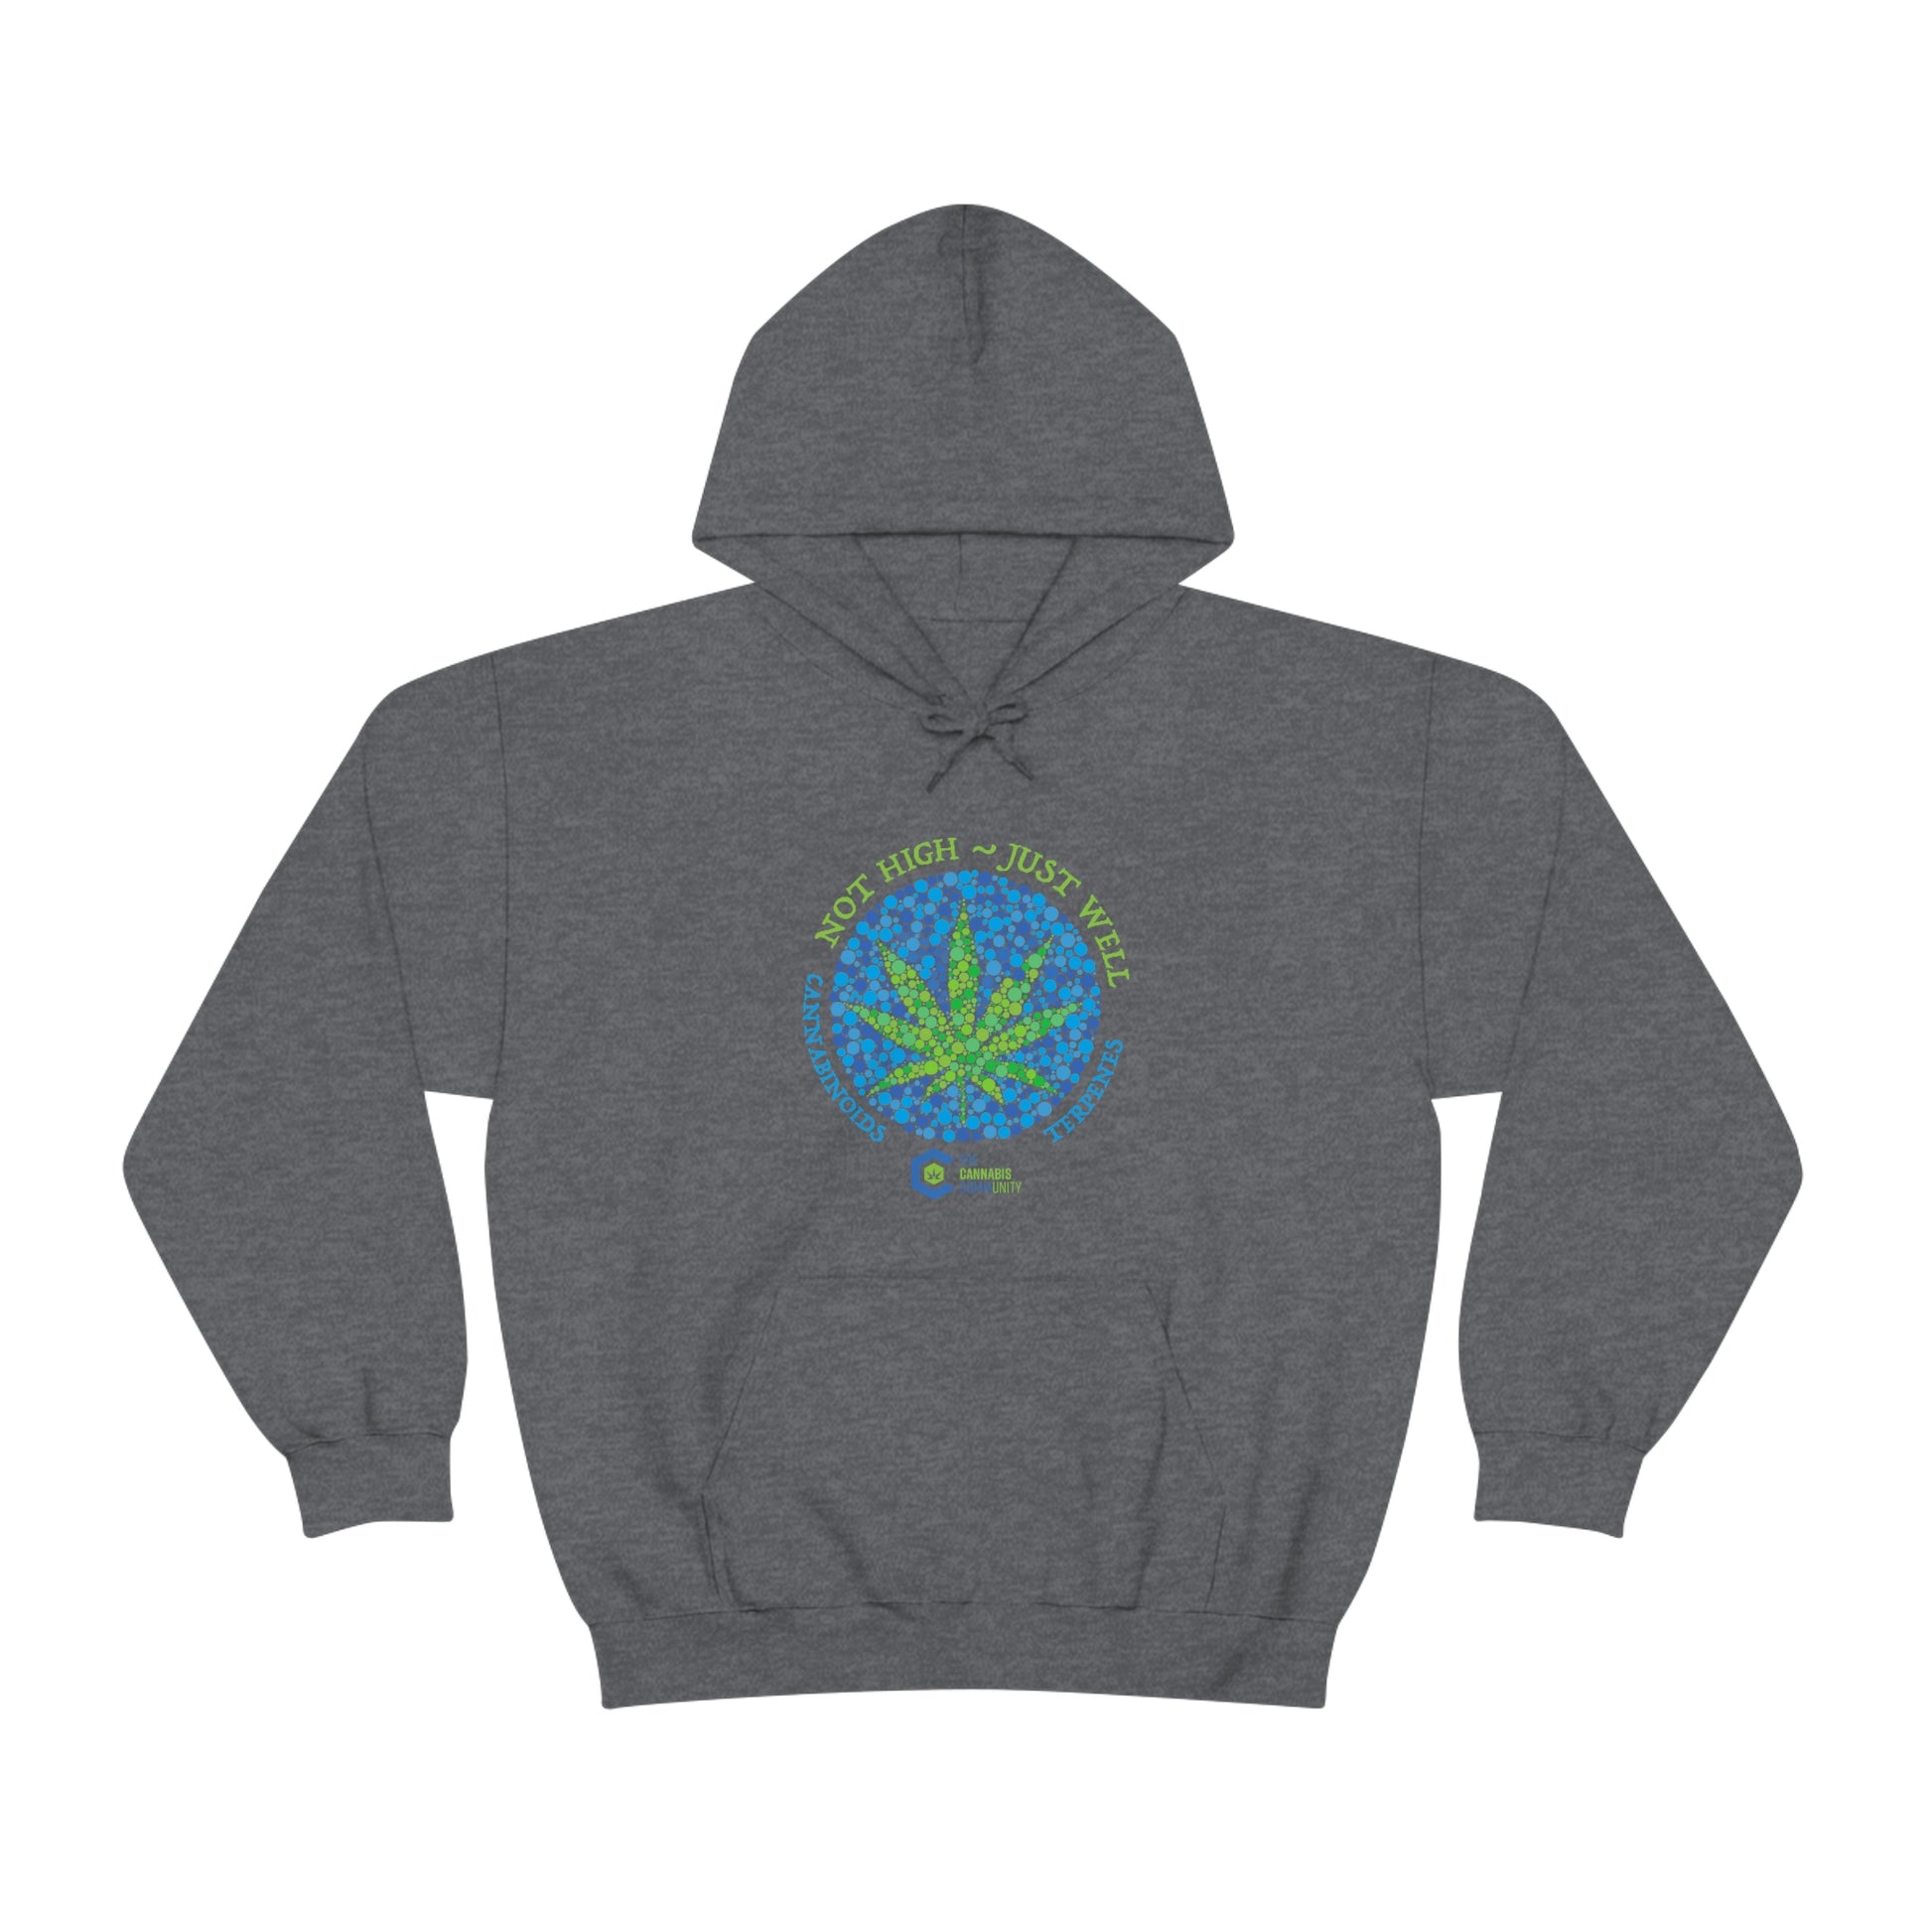 A Dark Heather, Not High, Just Well Cannabis Hoodie with a green and blue marijuana leaf on it.